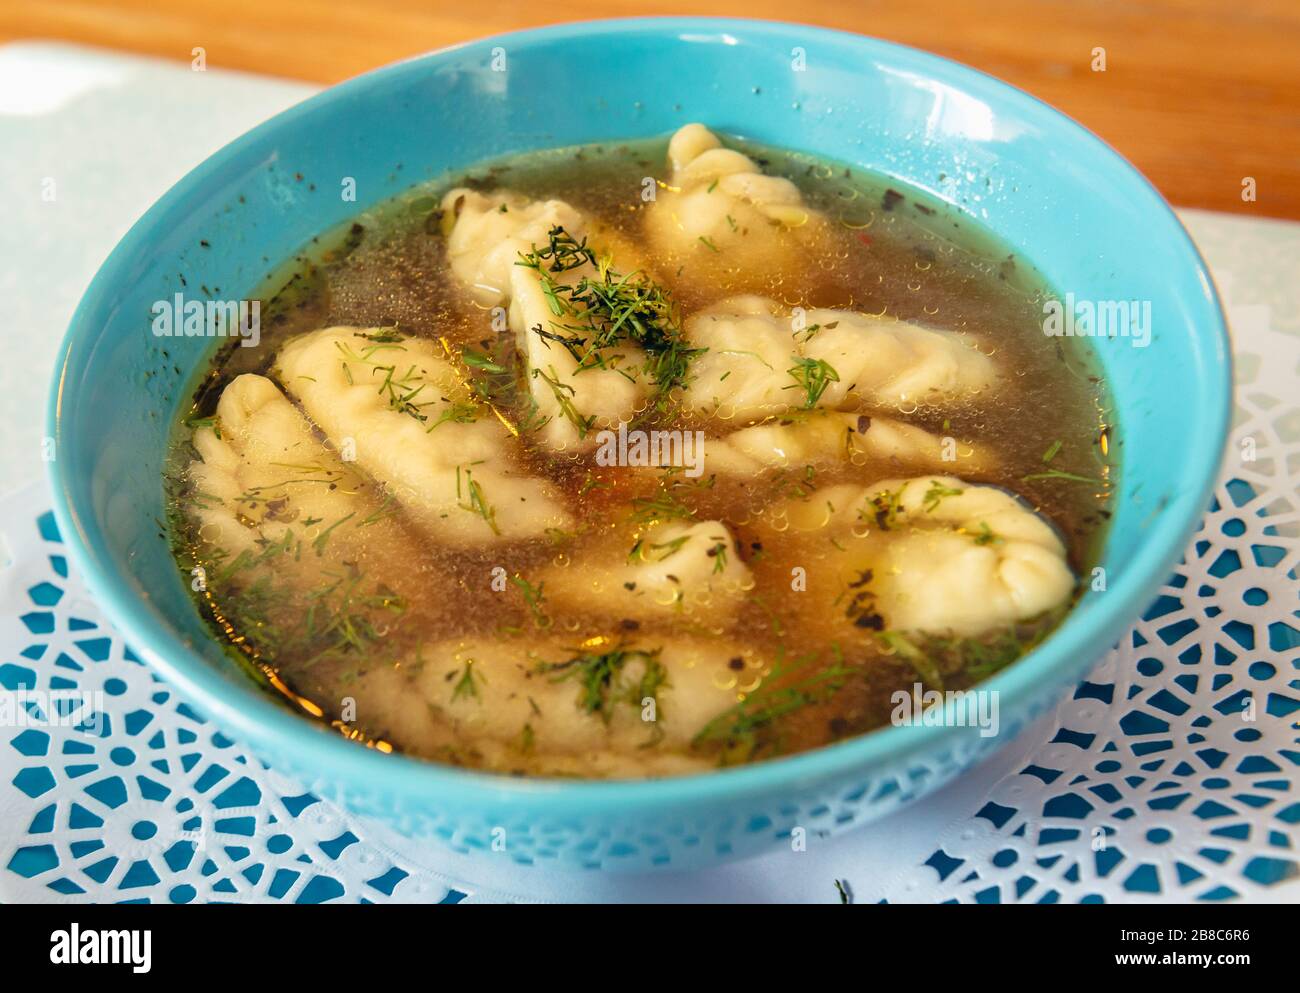 Kolduny, small stuffed dumplings filled with meat and boiled in broth - traditional dish in Poland and other Slavic countries Stock Photo